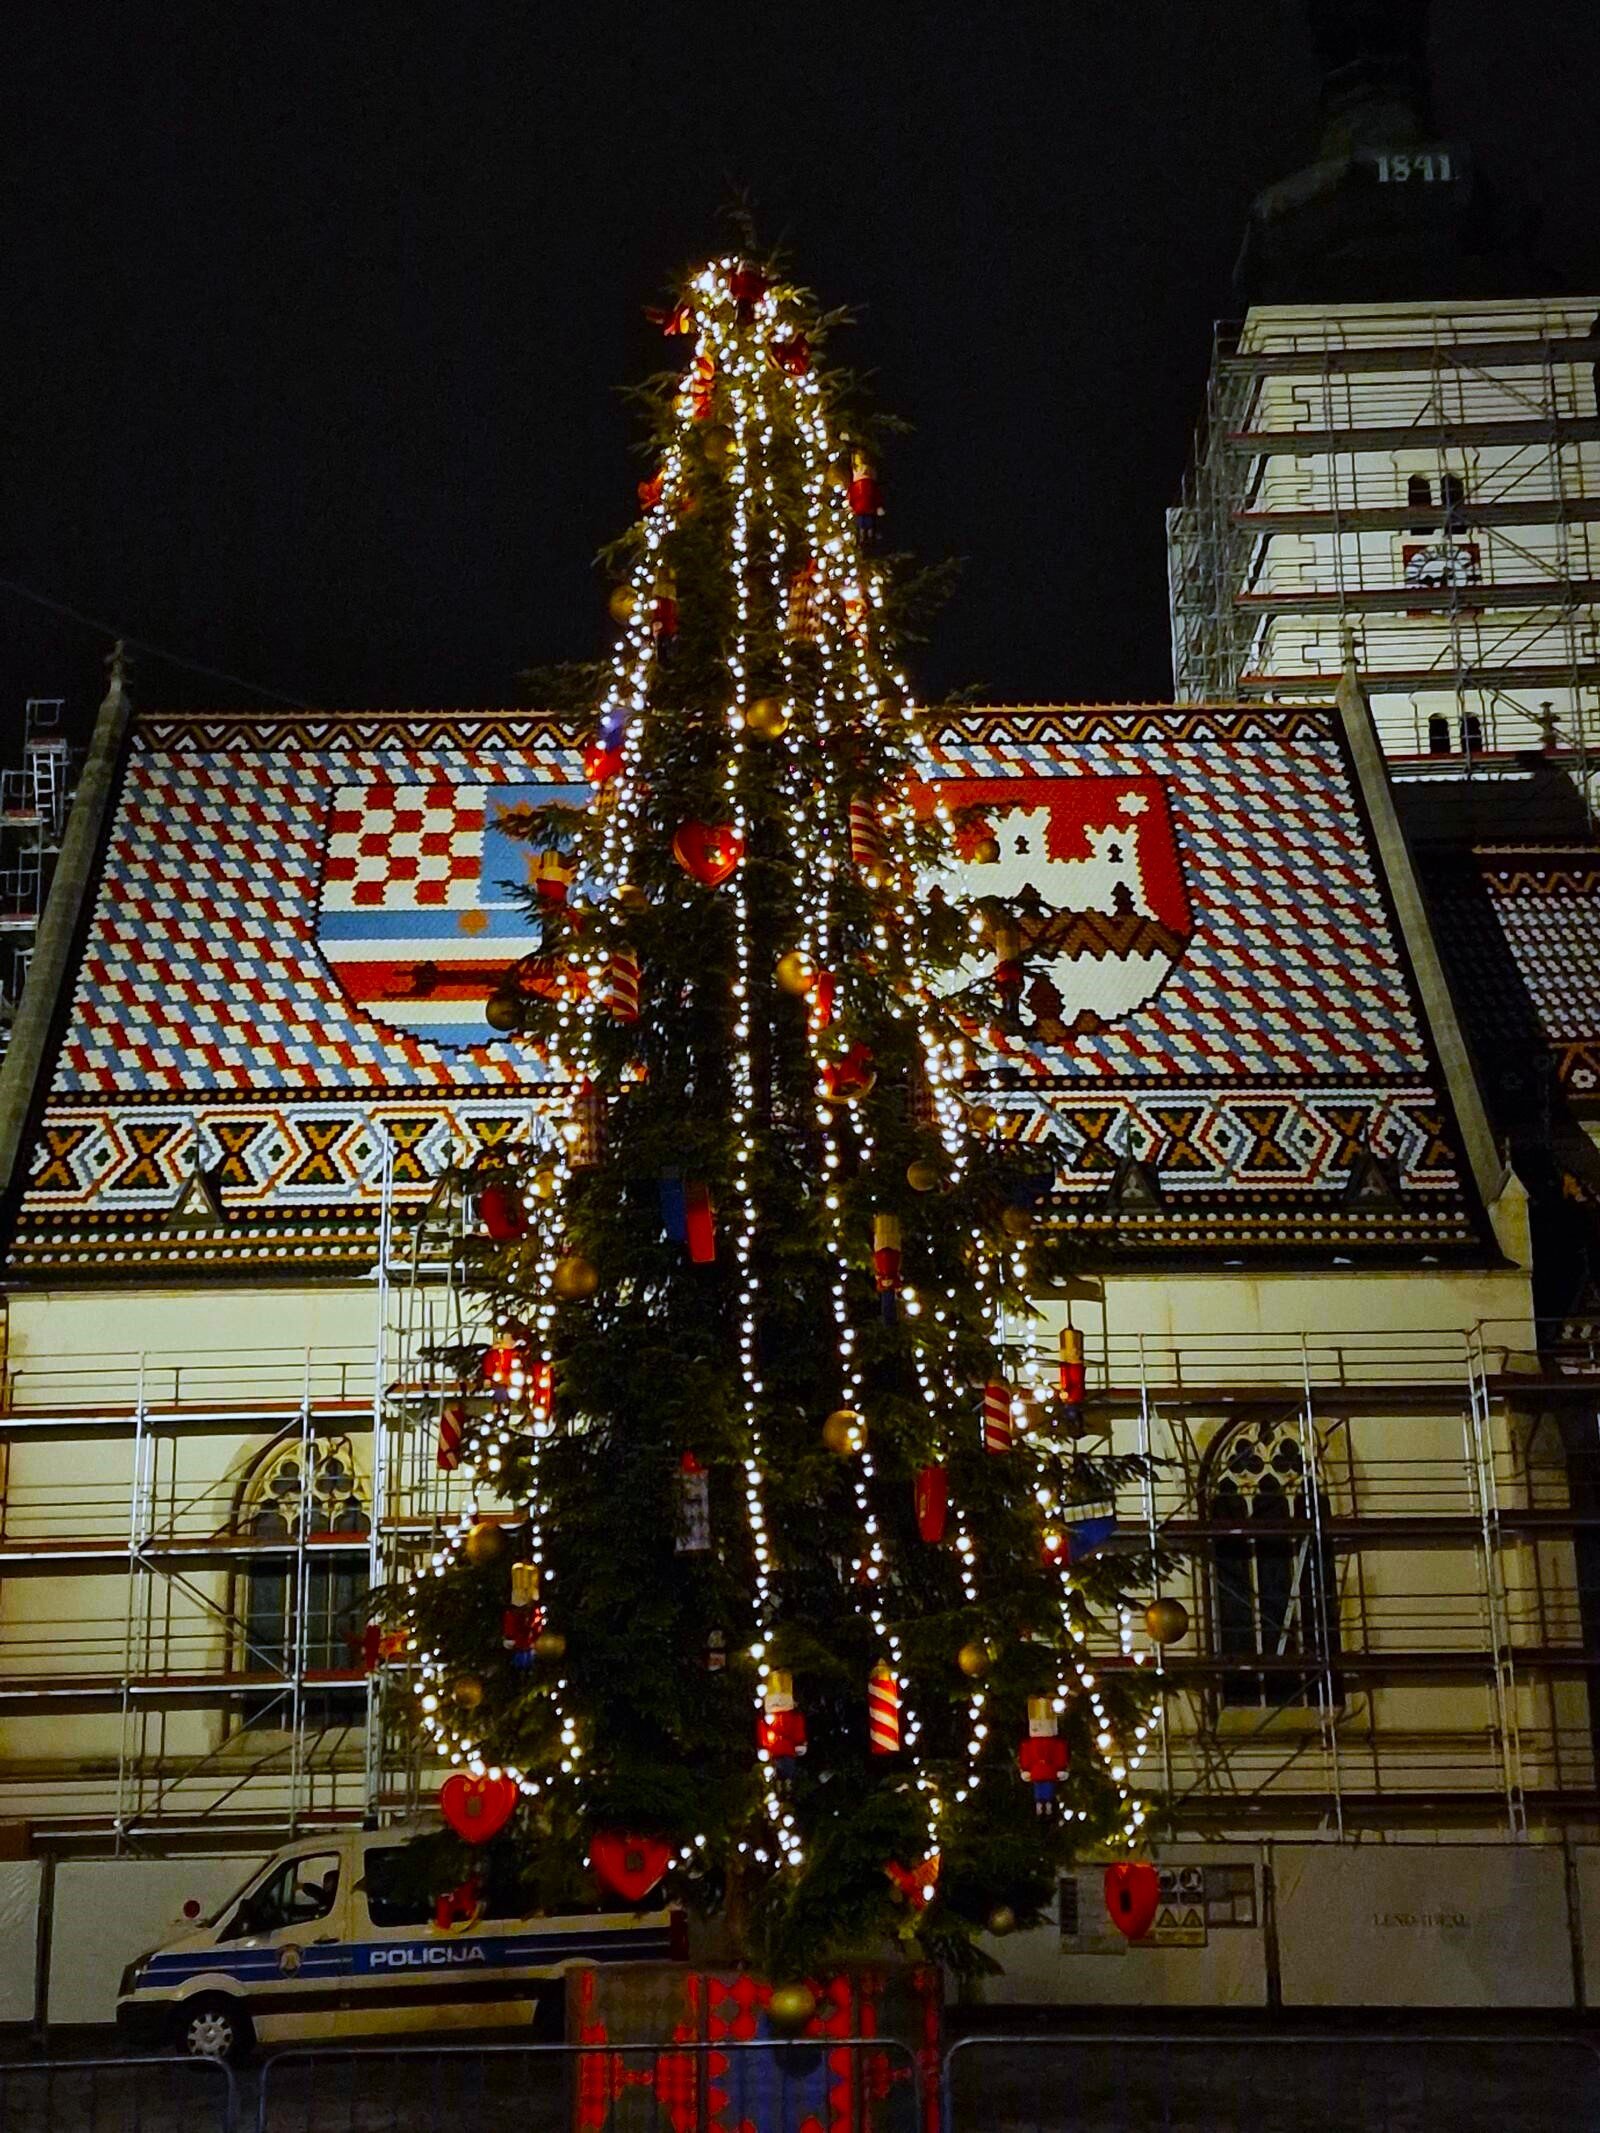 a large christmas tree with red decorations and white lights stands in front of a church with a red and white checked rooftop showing two coats of arms. Picture is taken at night